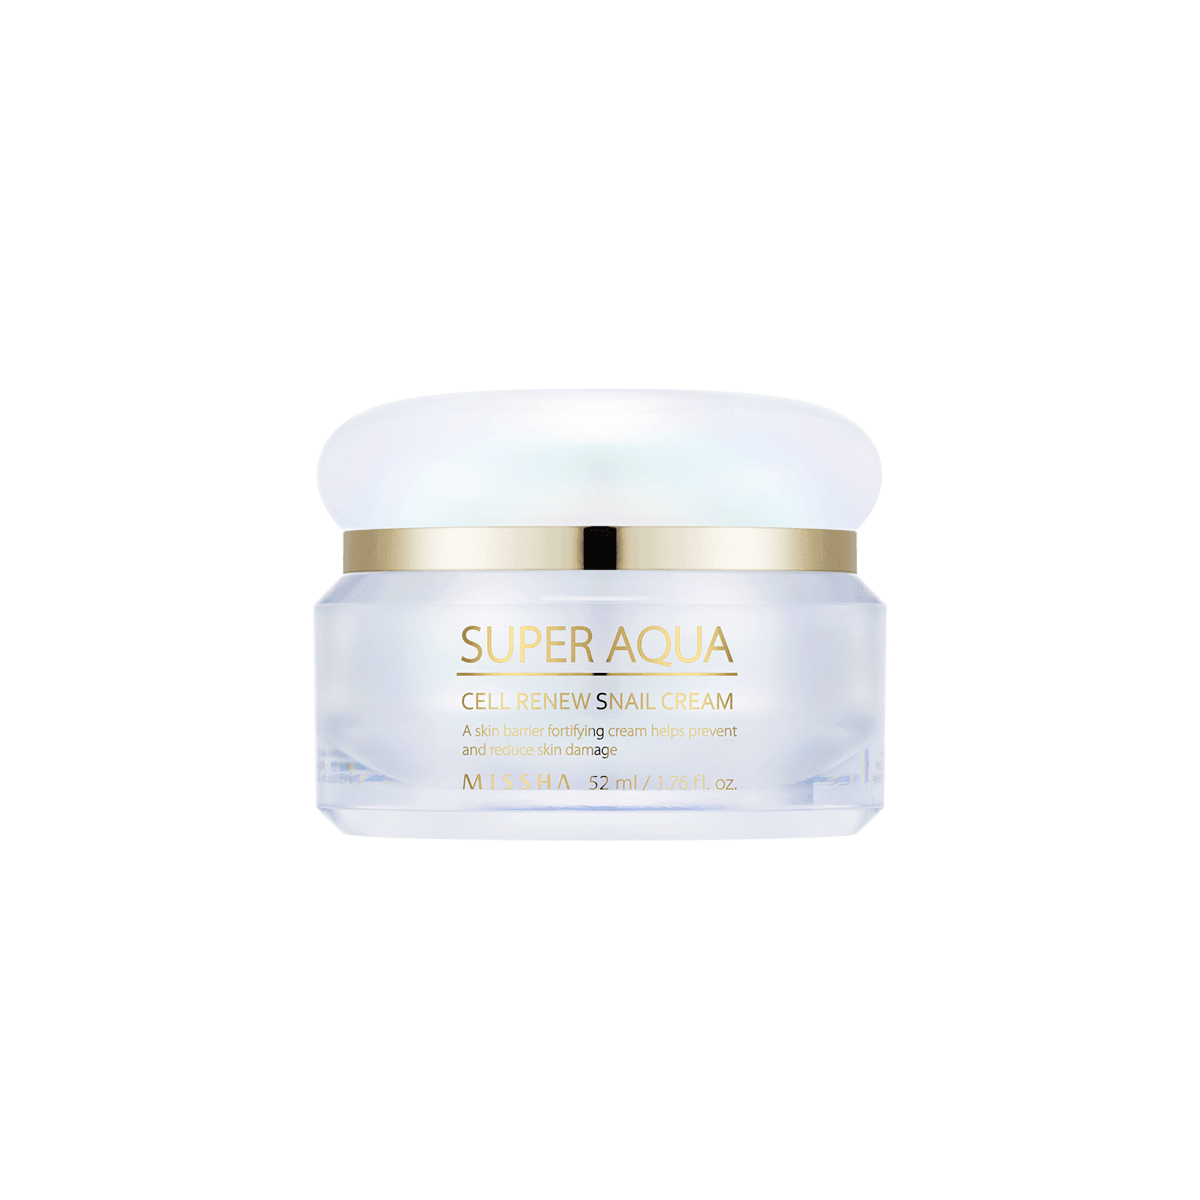 MISSHA Super Aqua Snail Cream-Korean skincare hydrating cream with 70% snail mucin extract for anti-aging and skin recovery